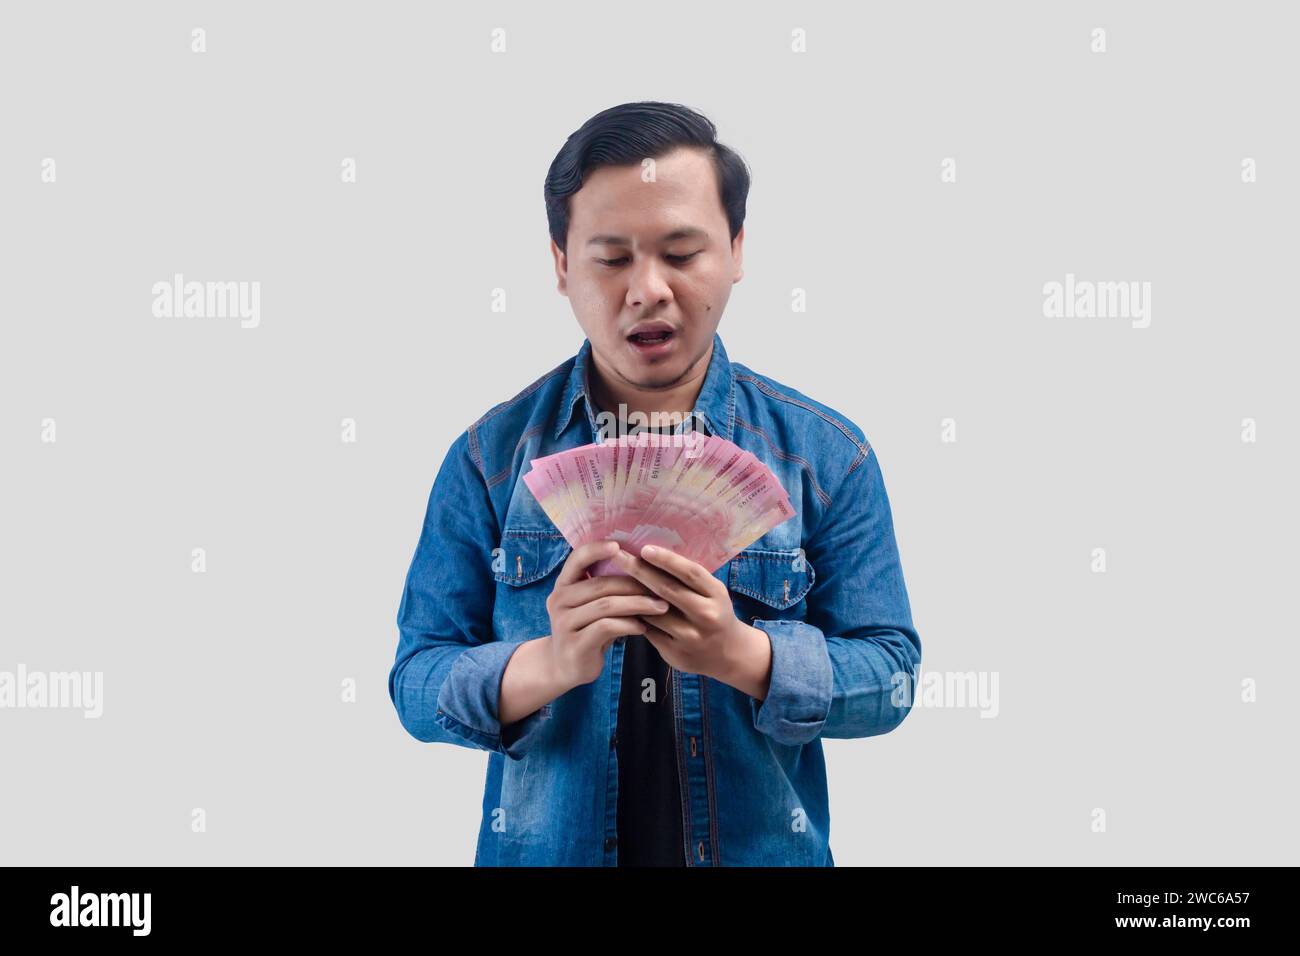 Young Asian man showing stunned face expression while holding paper money Stock Photo